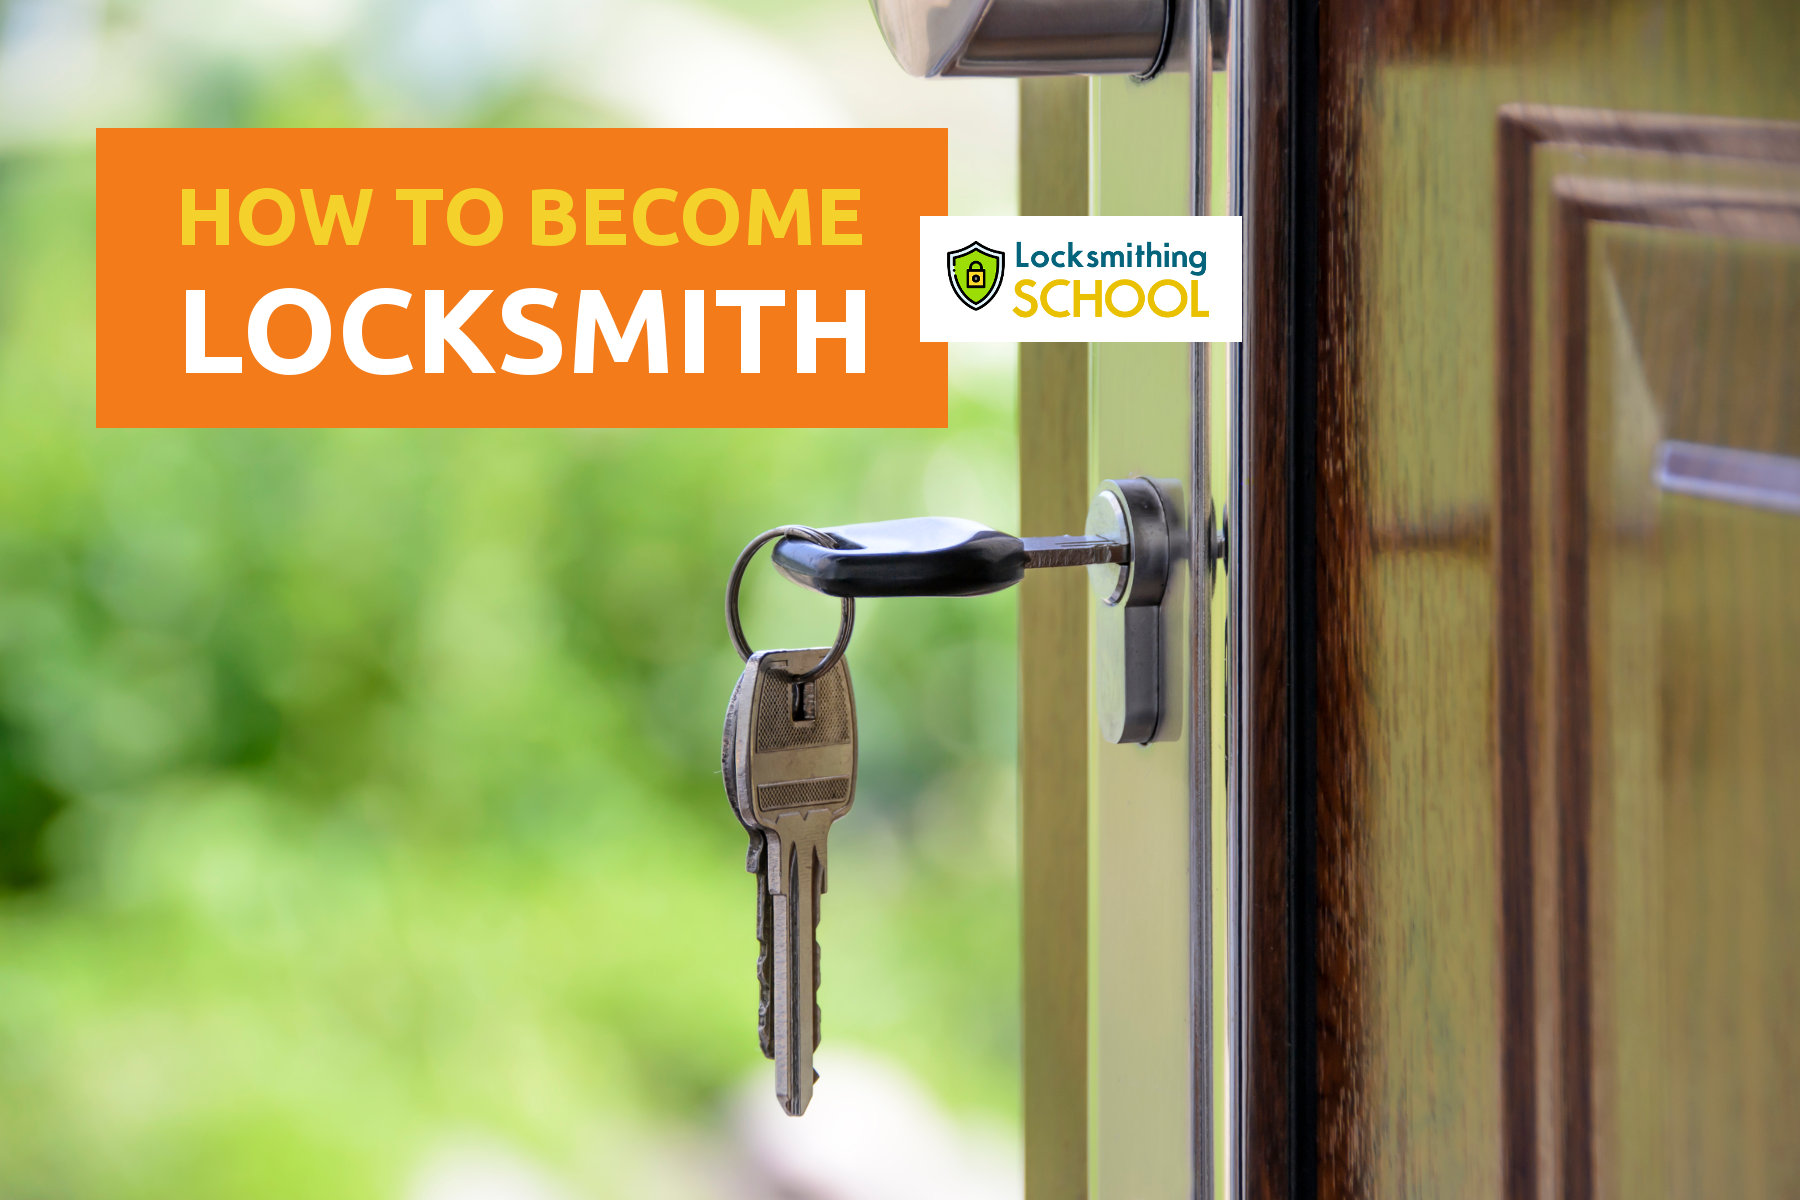 Locksmithing School: Learn How to Become a Locksmith Professional